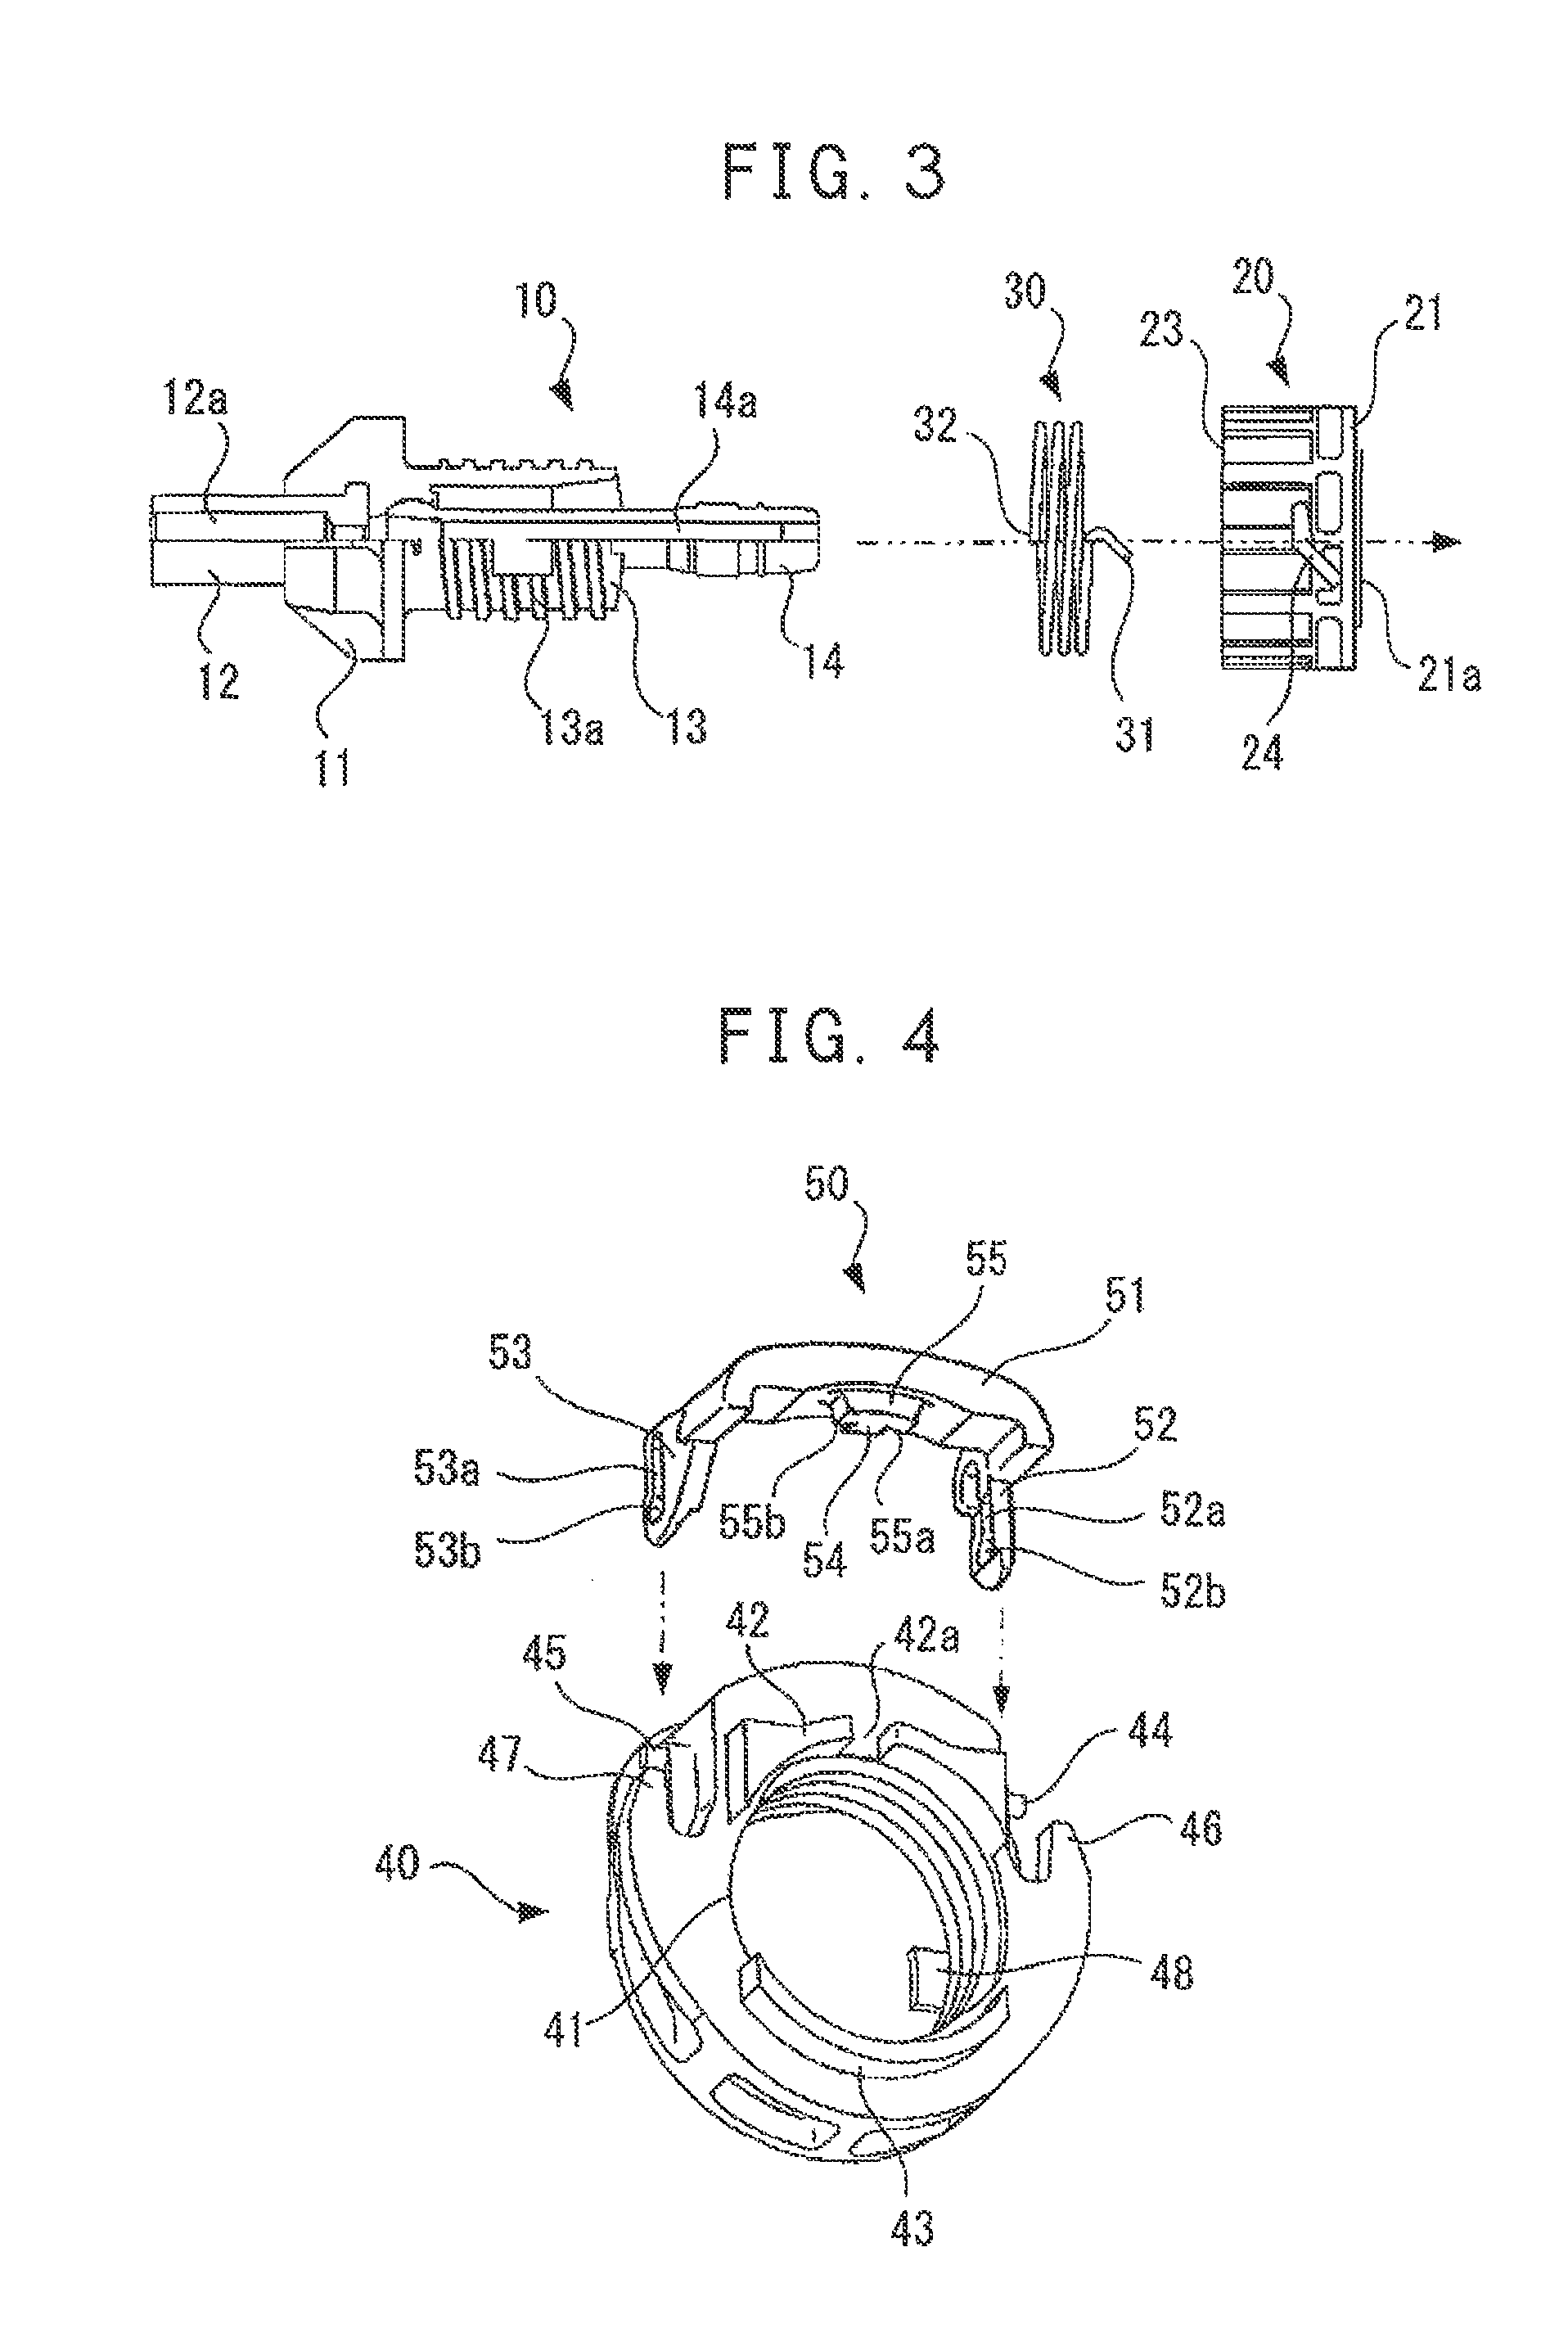 Terminal supporting device